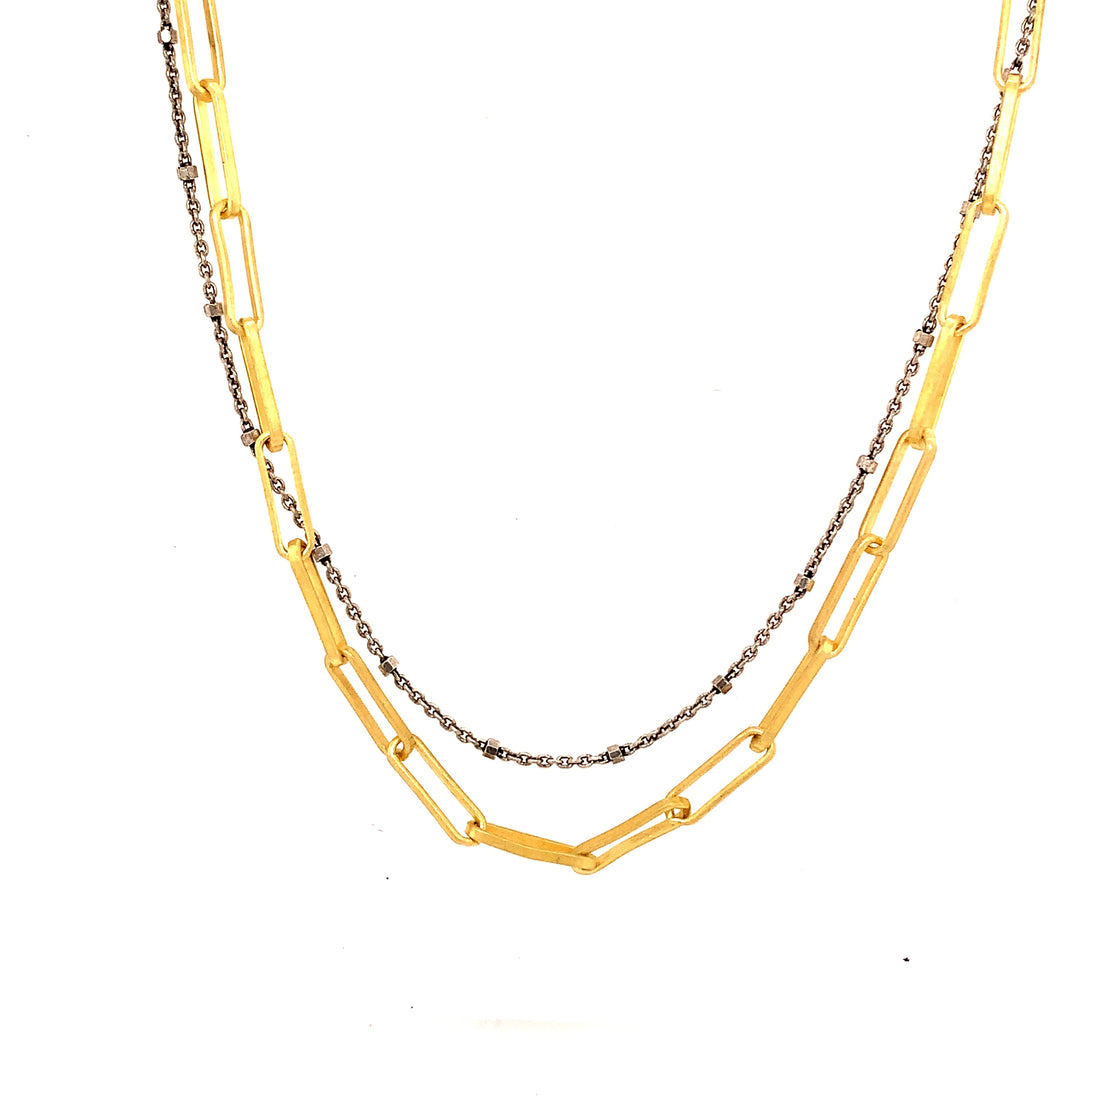 We've combined two subtle chains - one in oxidized sterling silver & the other in 14K gold-filled as a great layered necklace. You can add a few Talisman to the paperclip connector for a look that is simple and refined.